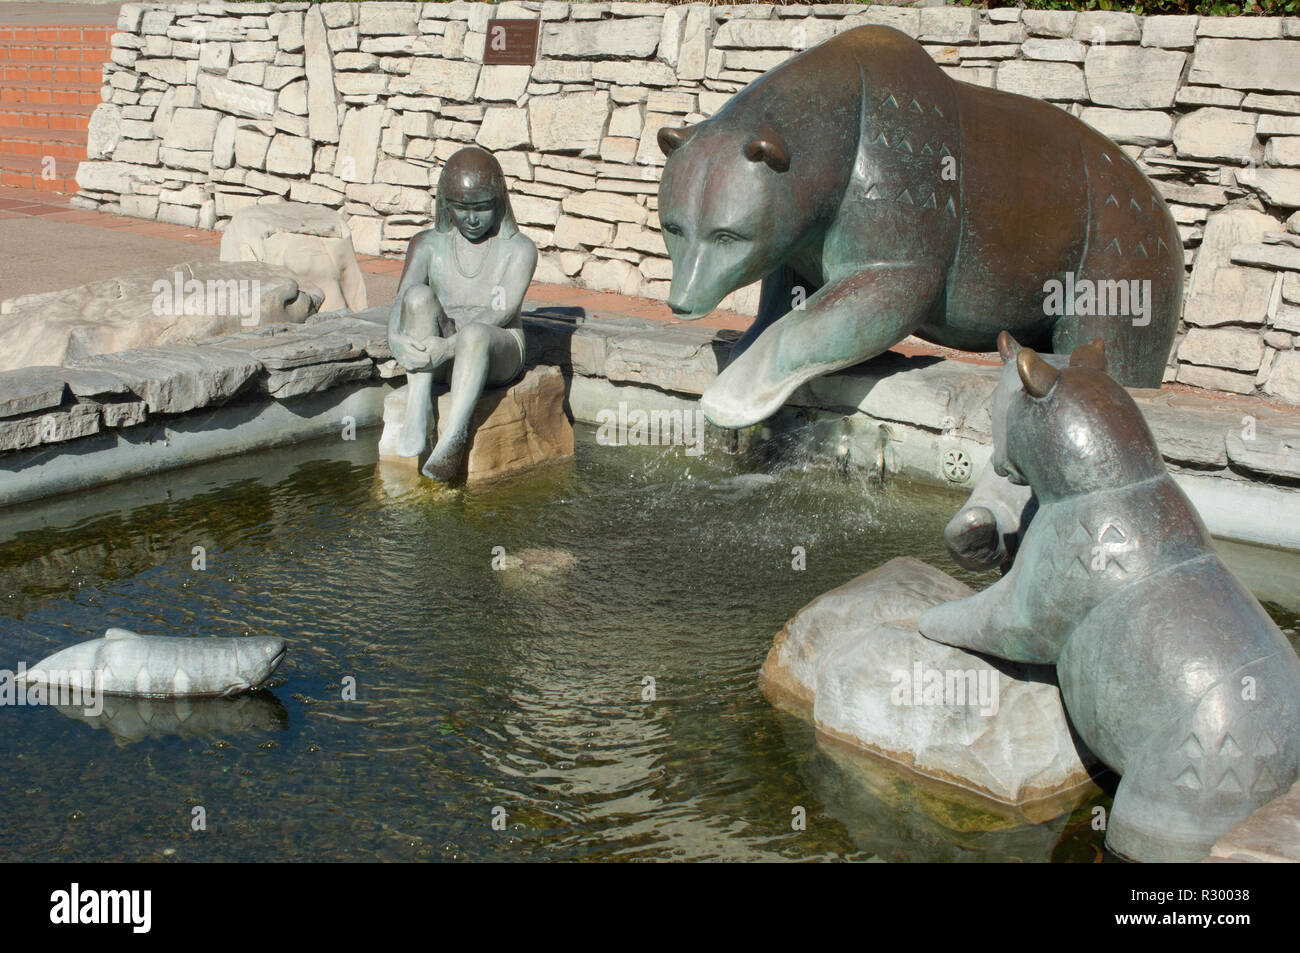 Chumash child with bears and fish, a fountain at San Luis Obispo Mission, California, sculpted by Paula Zima. Digital photograph Stock Photo